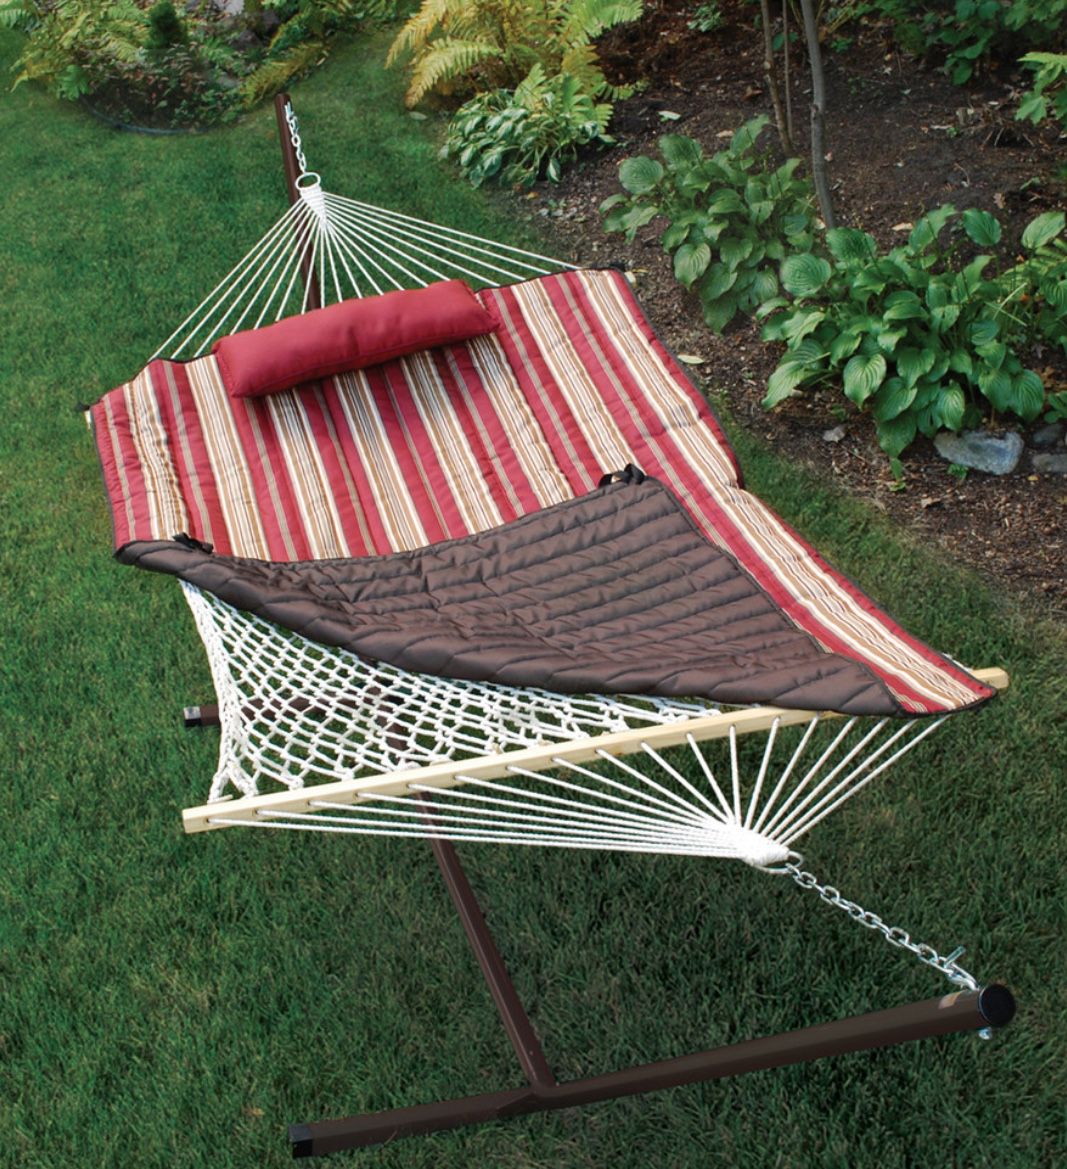 Algoma Deluxe Hammock Set - Includes Rope Hammock, Padded Quilt, Pillow, Stand, Storage Bag, Drink and Media Holder